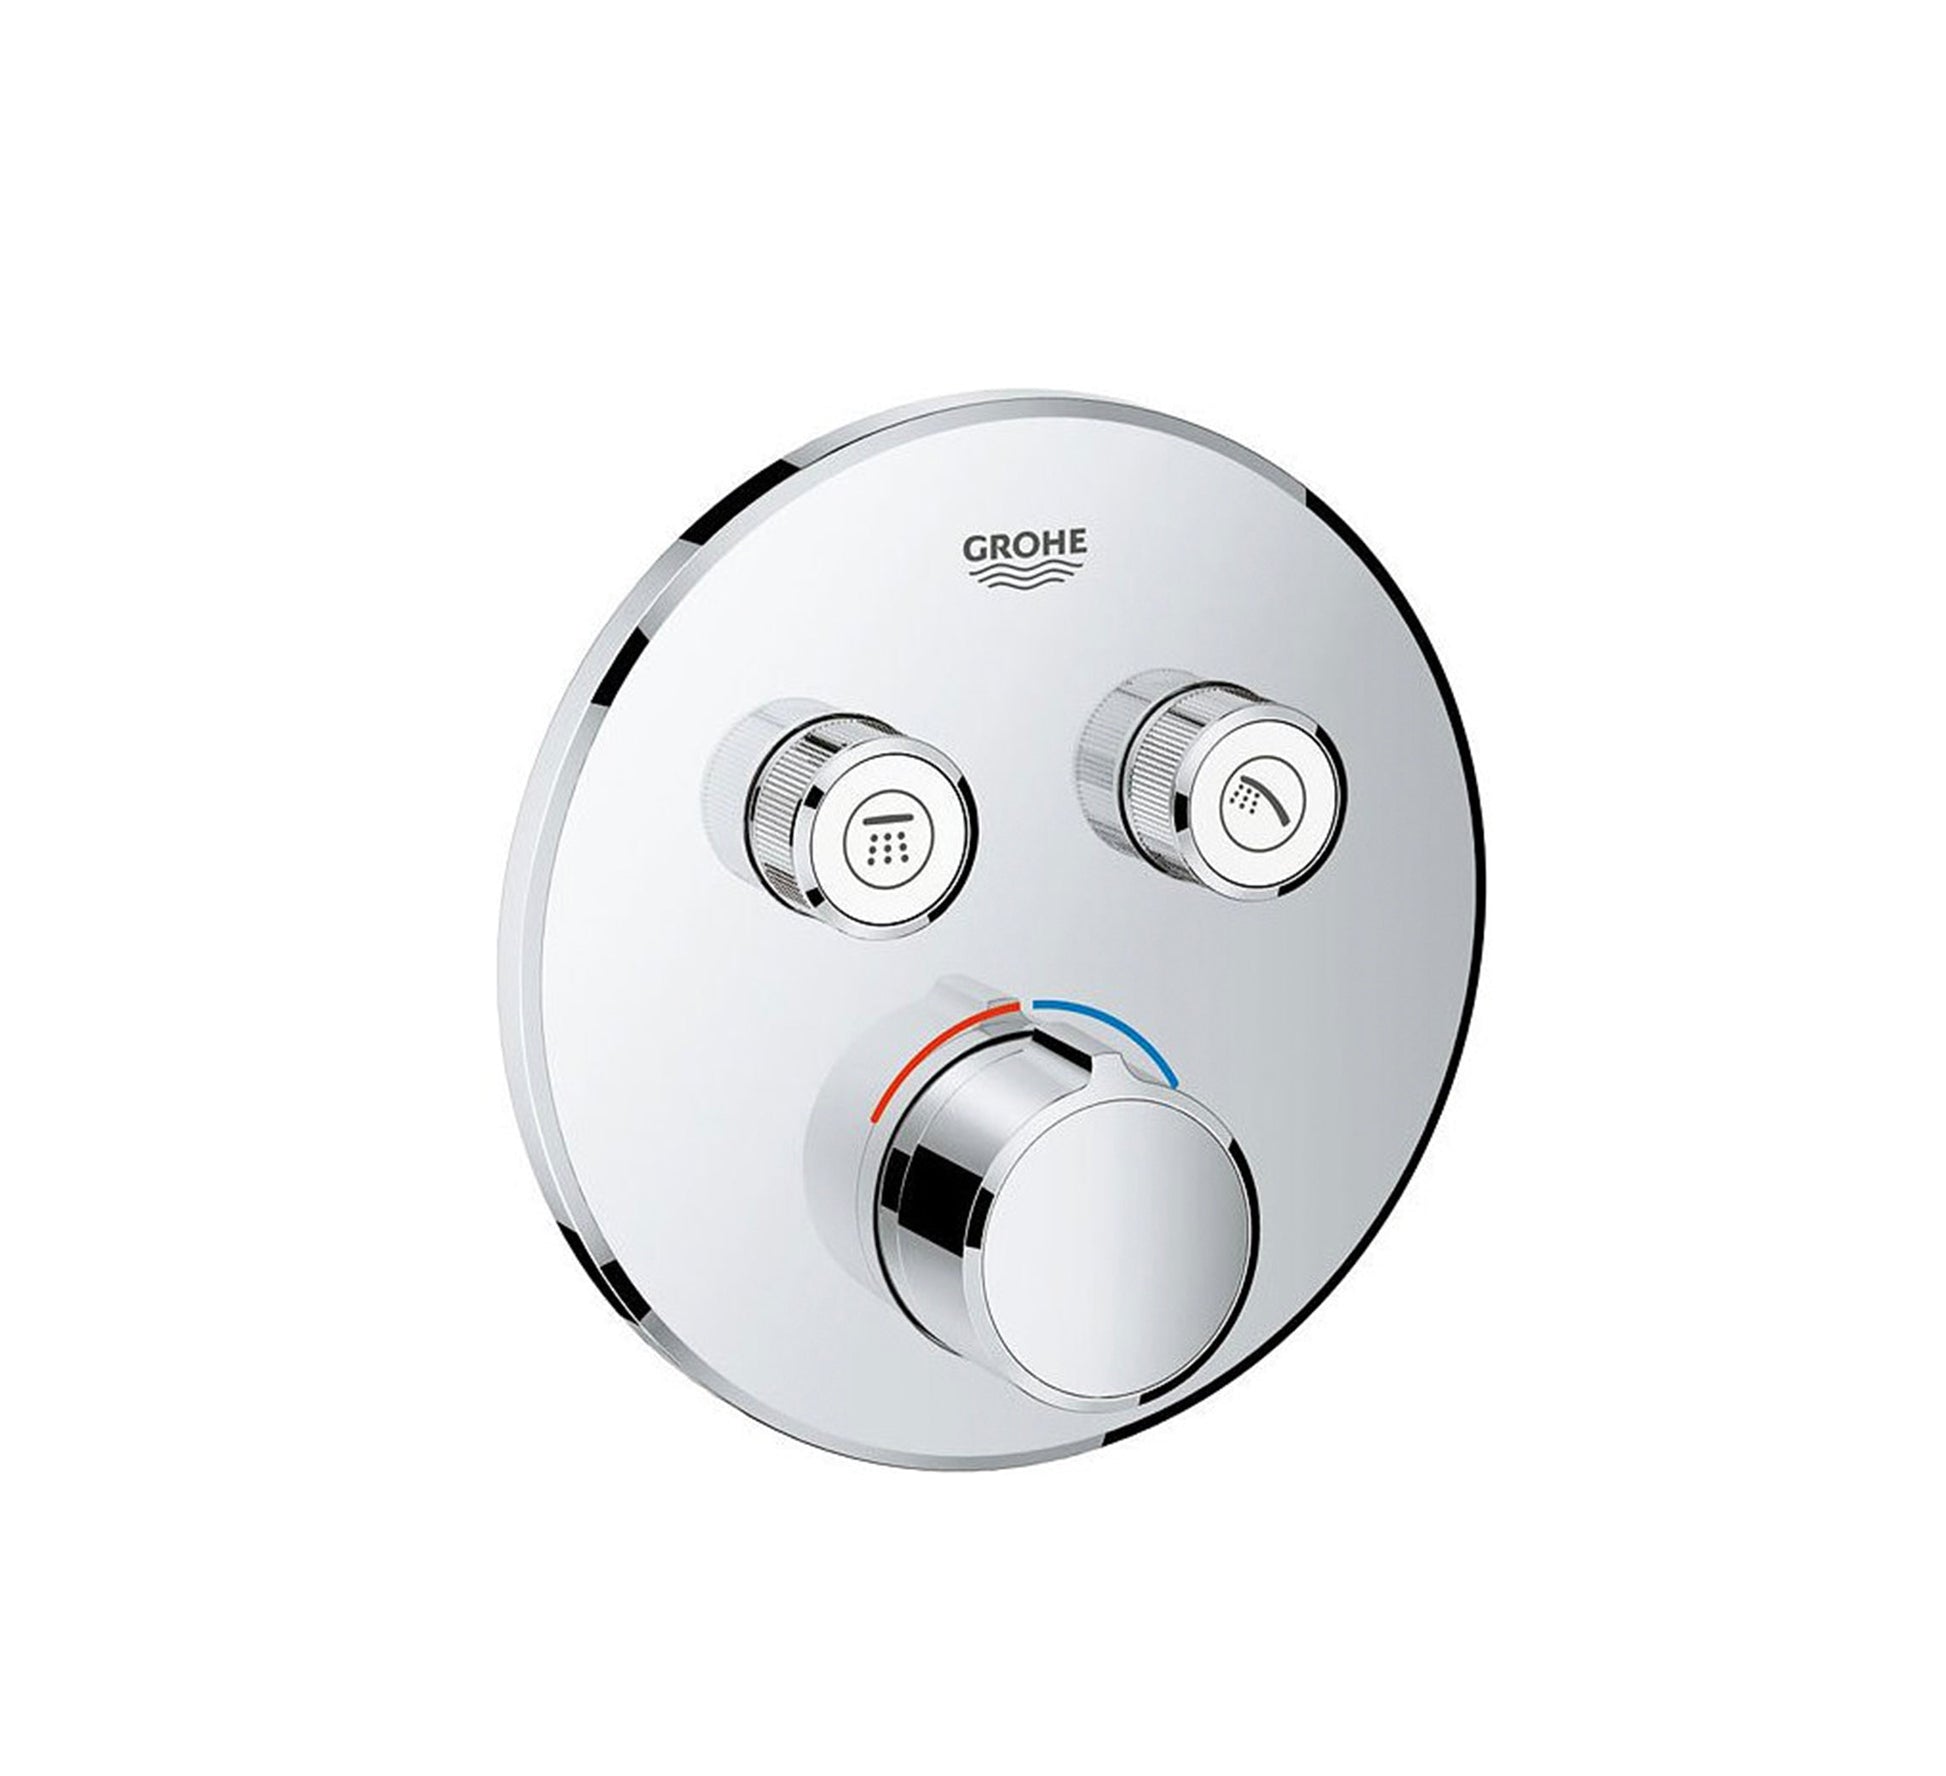 GROHE SMART CONTROL CONCEALED MIXER ROUND WITH ONE VALVE 2SC - 29145000